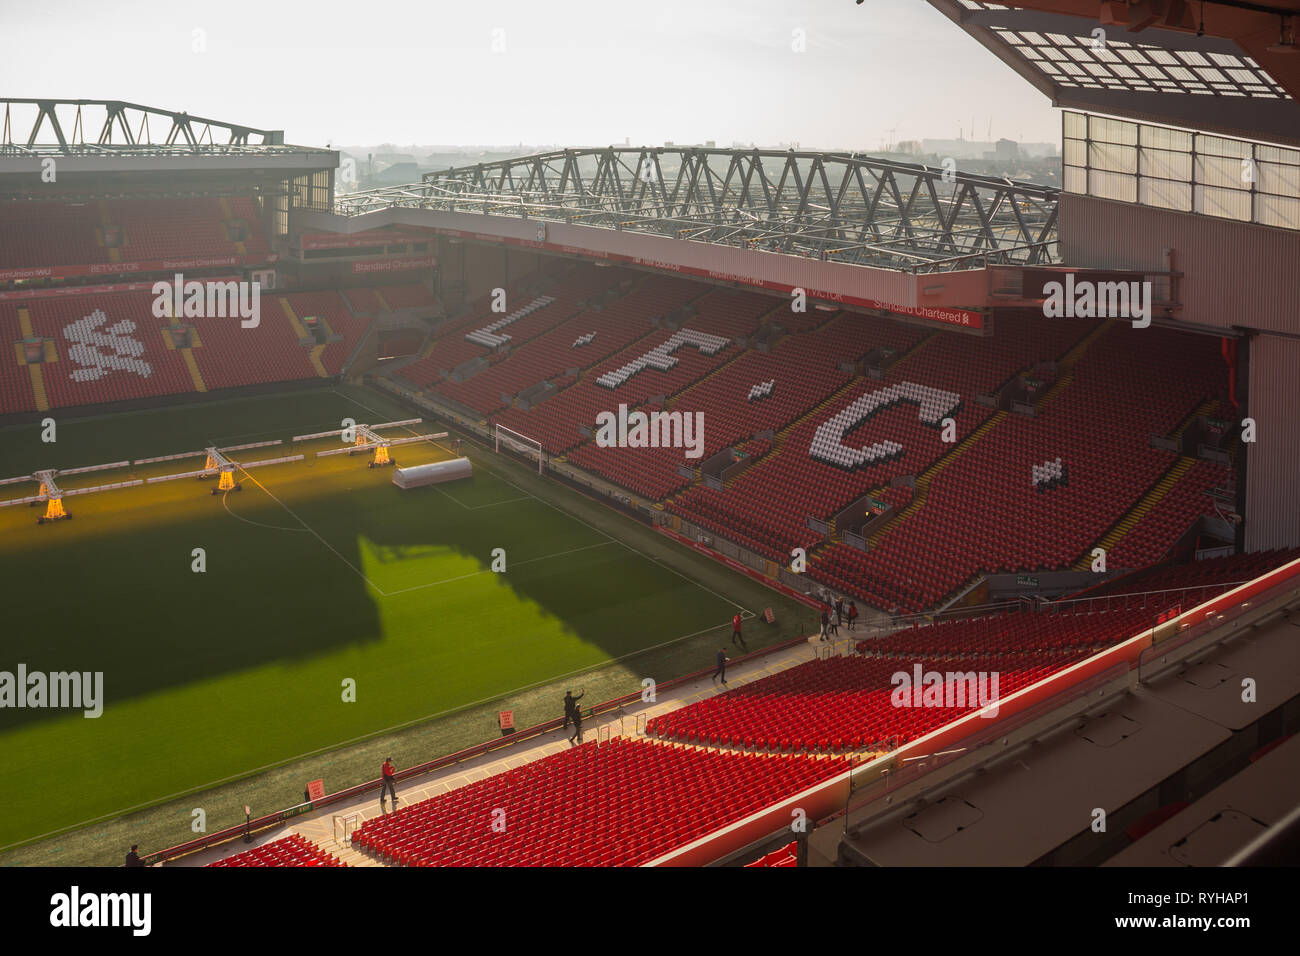 View from Main Stand of the famous Kop end terrace with red seaing tat the south west end of the pitch at Liverpool Football Club Anfield Road Stadium Stock Photo